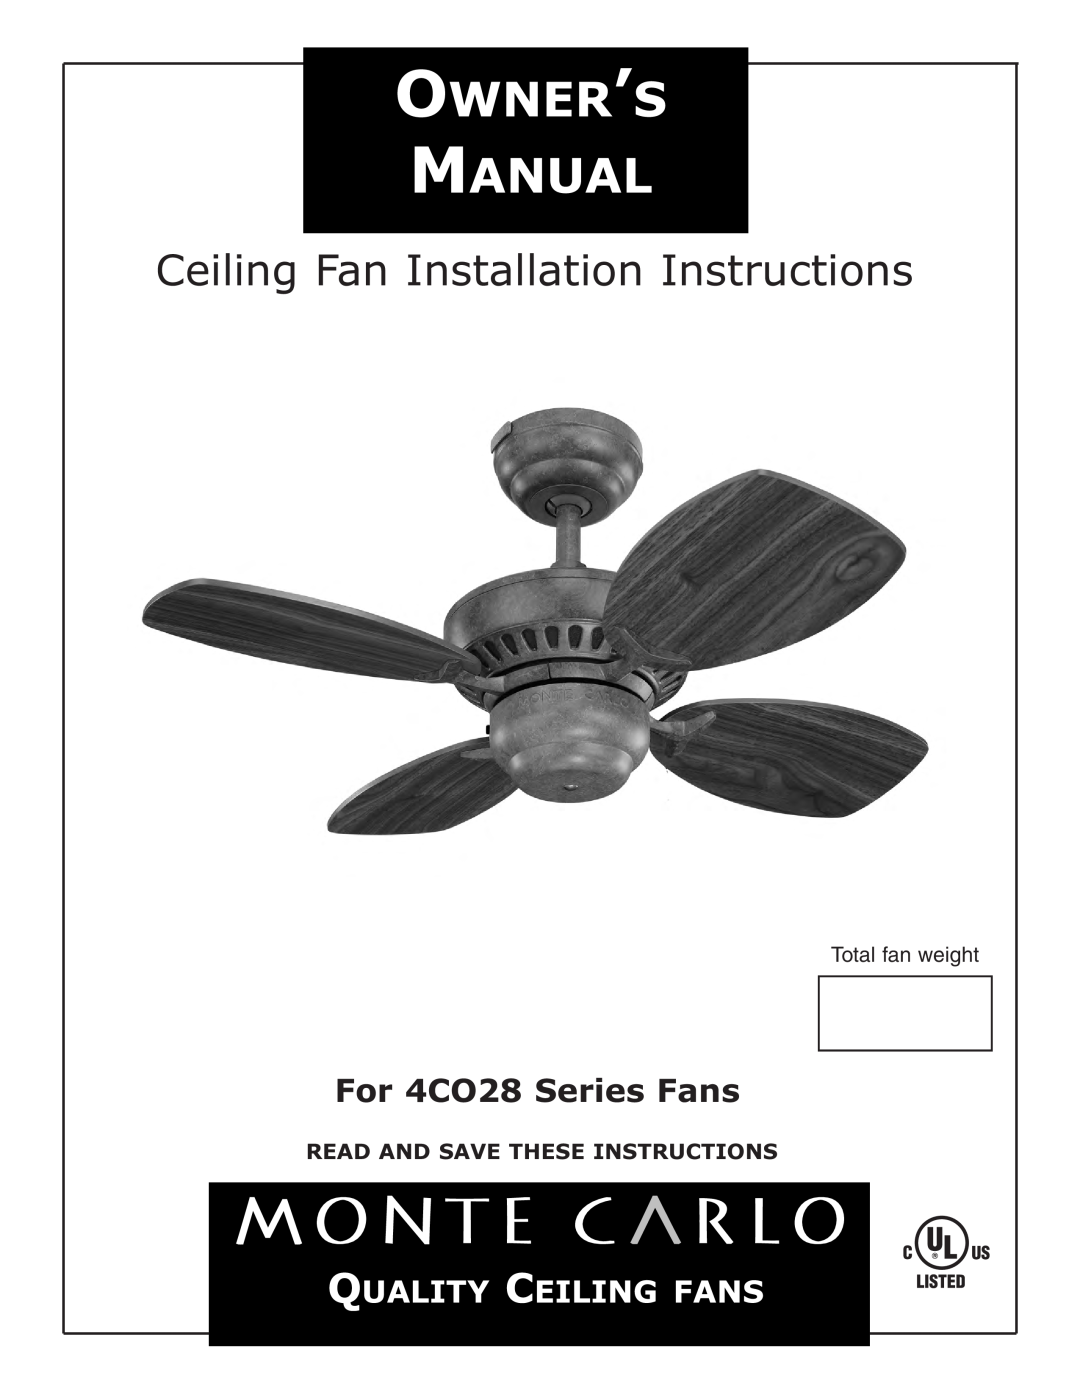 Monte Carlo Fan Company installation instructions Read And Save These Instructions, For 4CO28 Series Fans 